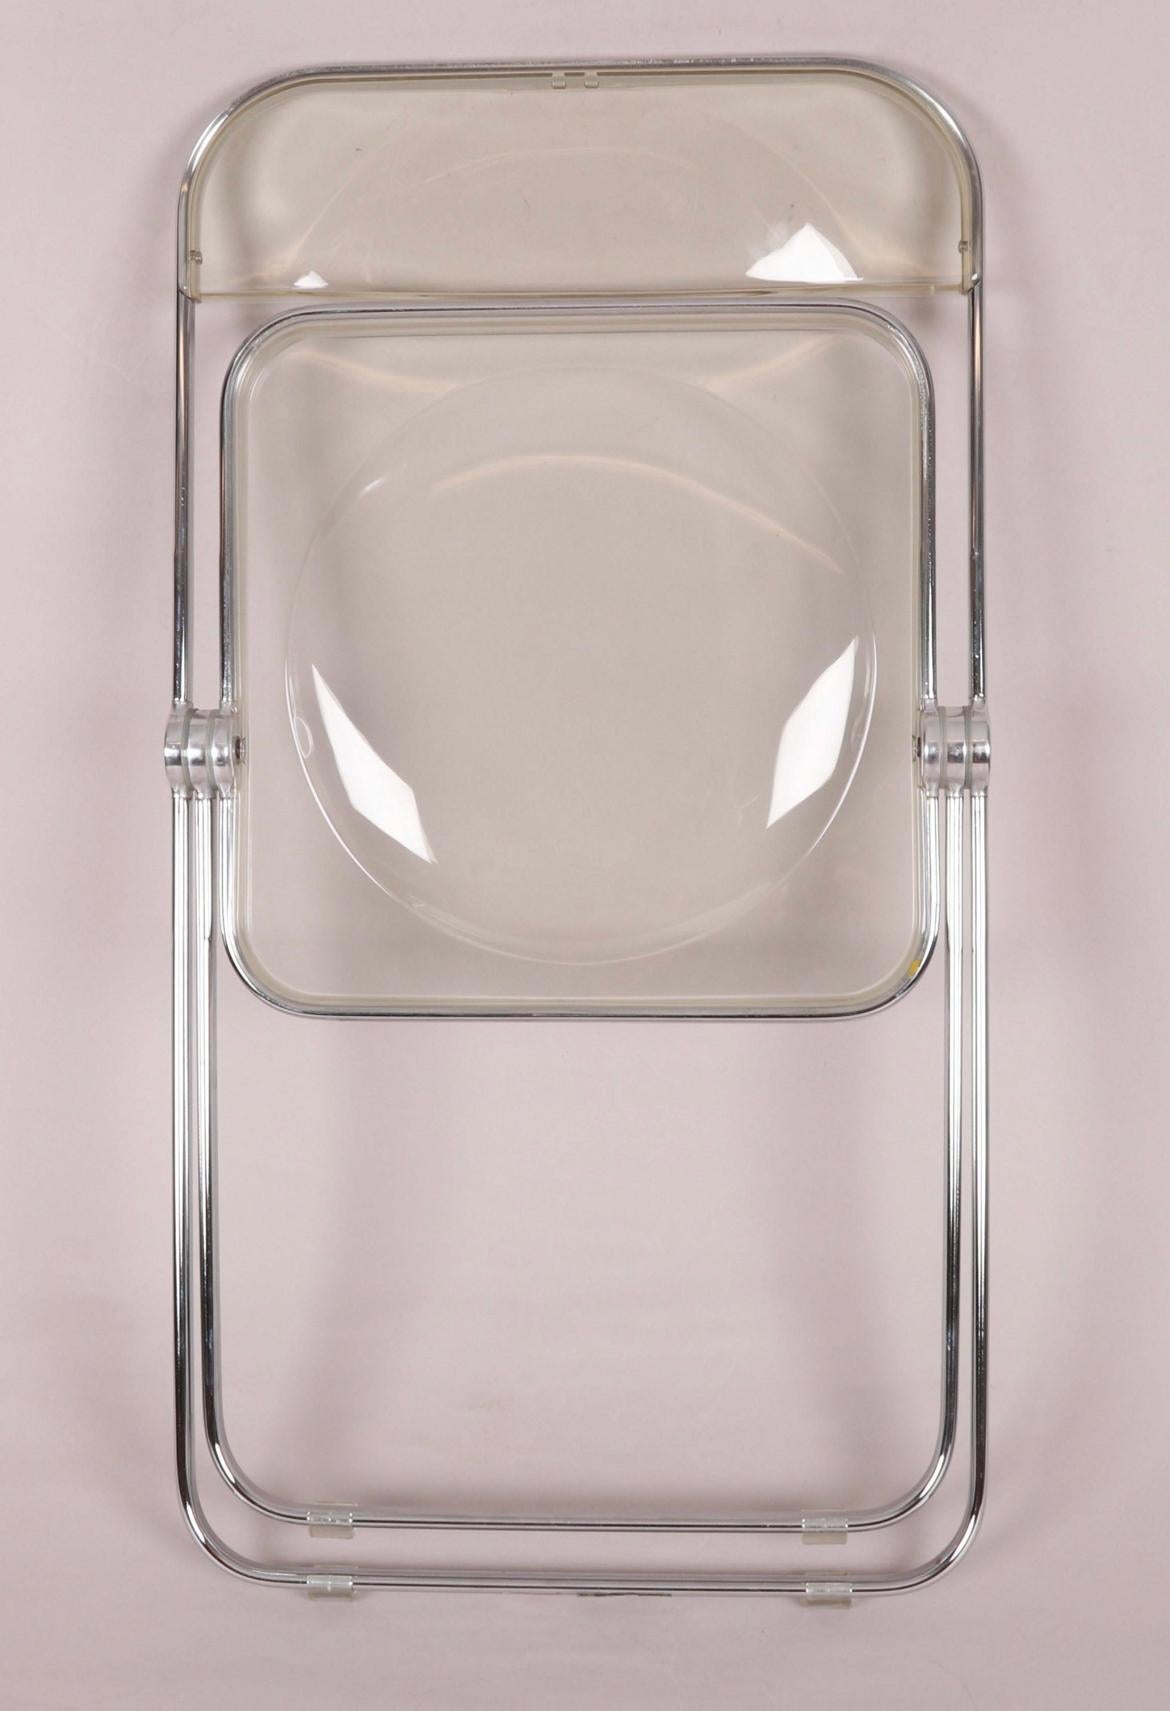 Mid-Century Modern Lucite pila folding chairs by Giancarlo Piretti for Castelli
Selling as a set of (4) chairs all from the same owner. Very clean with original Box.

Available in Brooklyn NYC

Like new.

About this piece
Folding chair